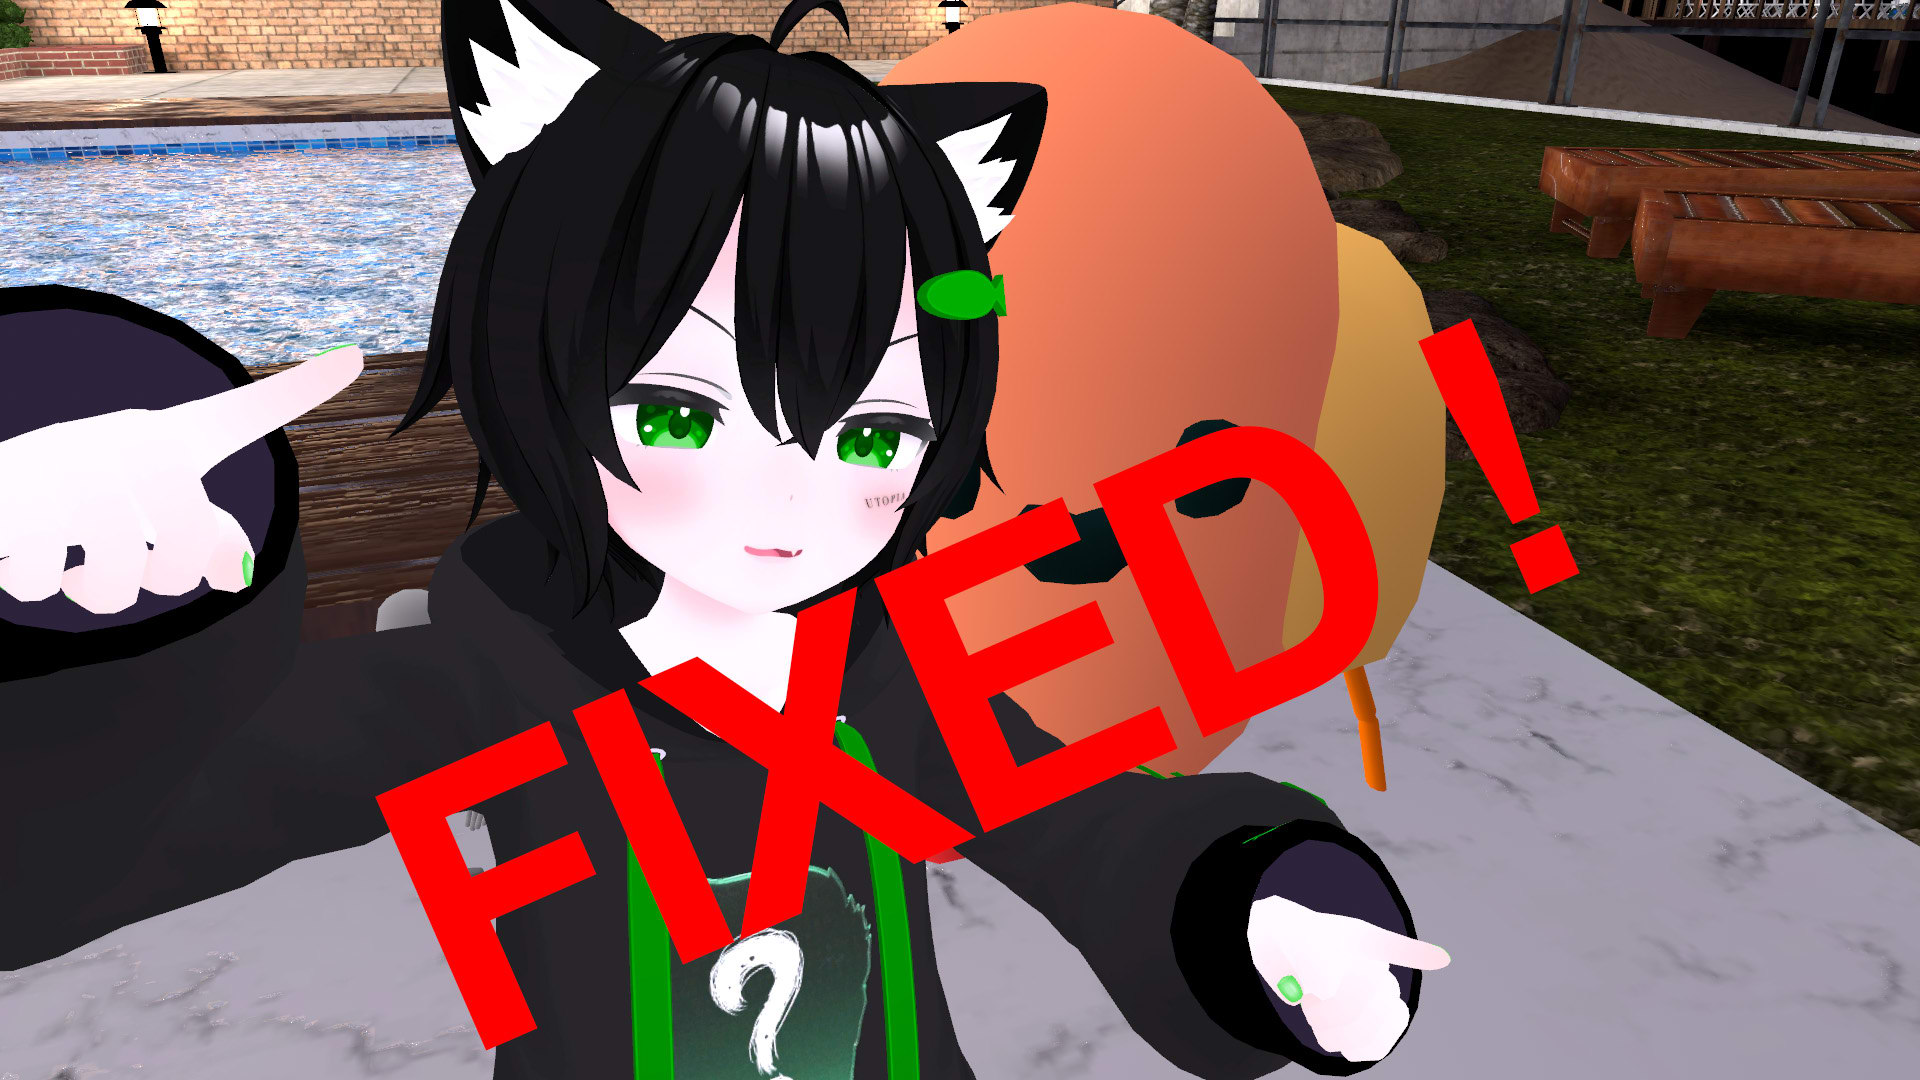 VRChat Avatars Not Loading: How to Fix VRChat Avatars Not Loading? - News